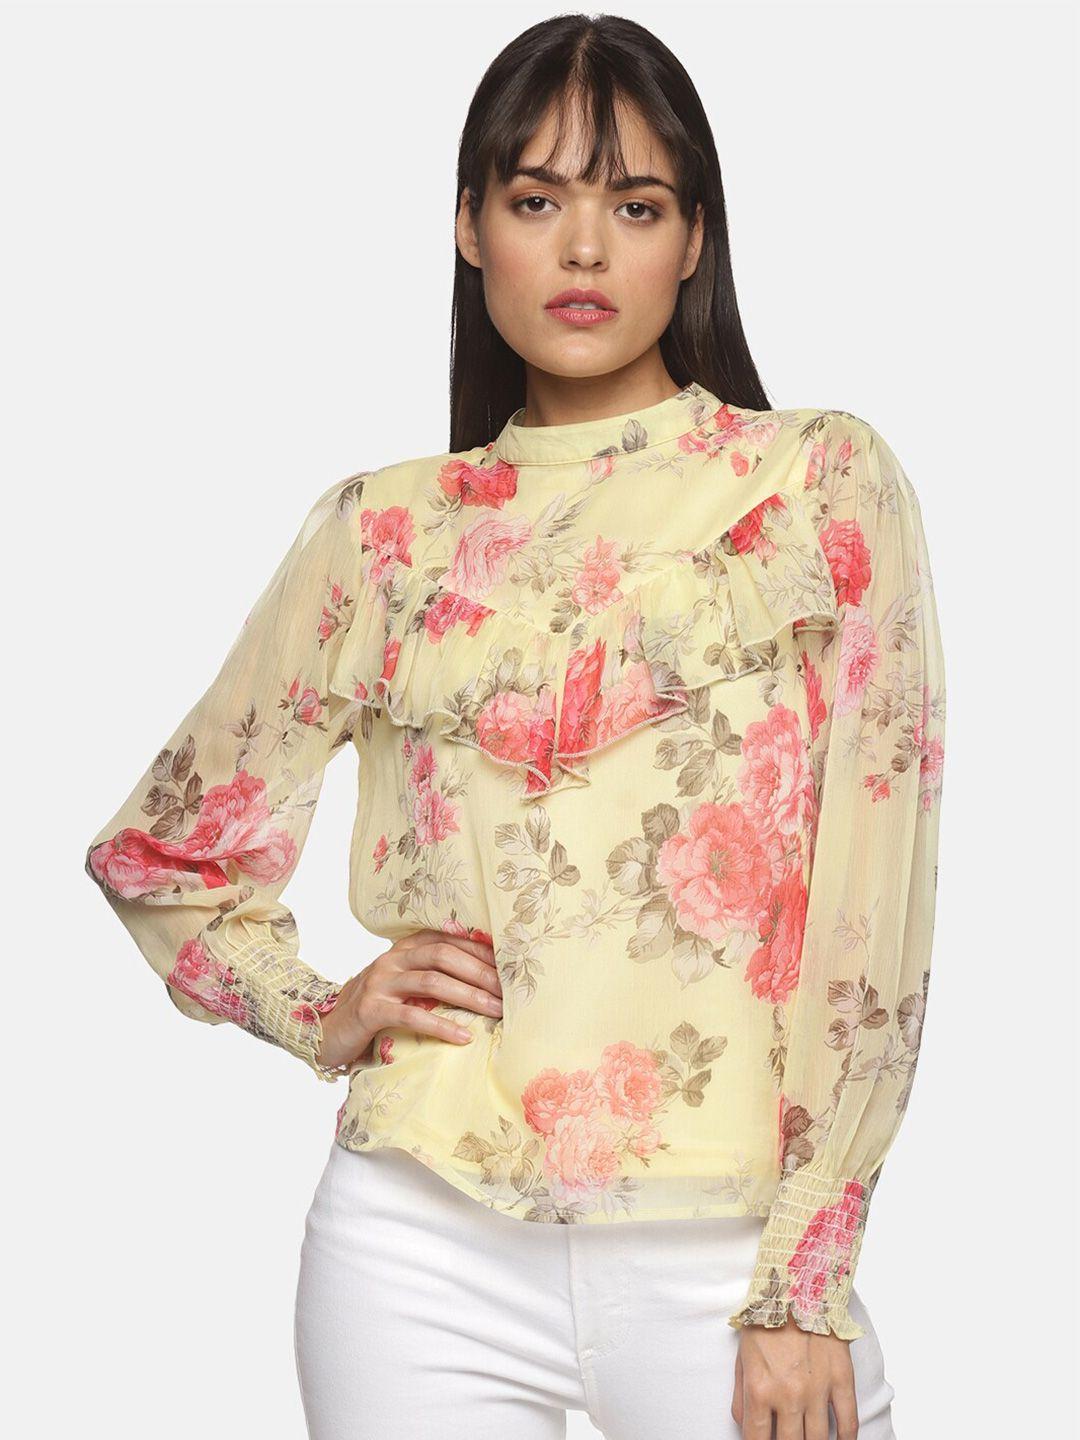 here&now yellow floral printed ruffles chiffon top